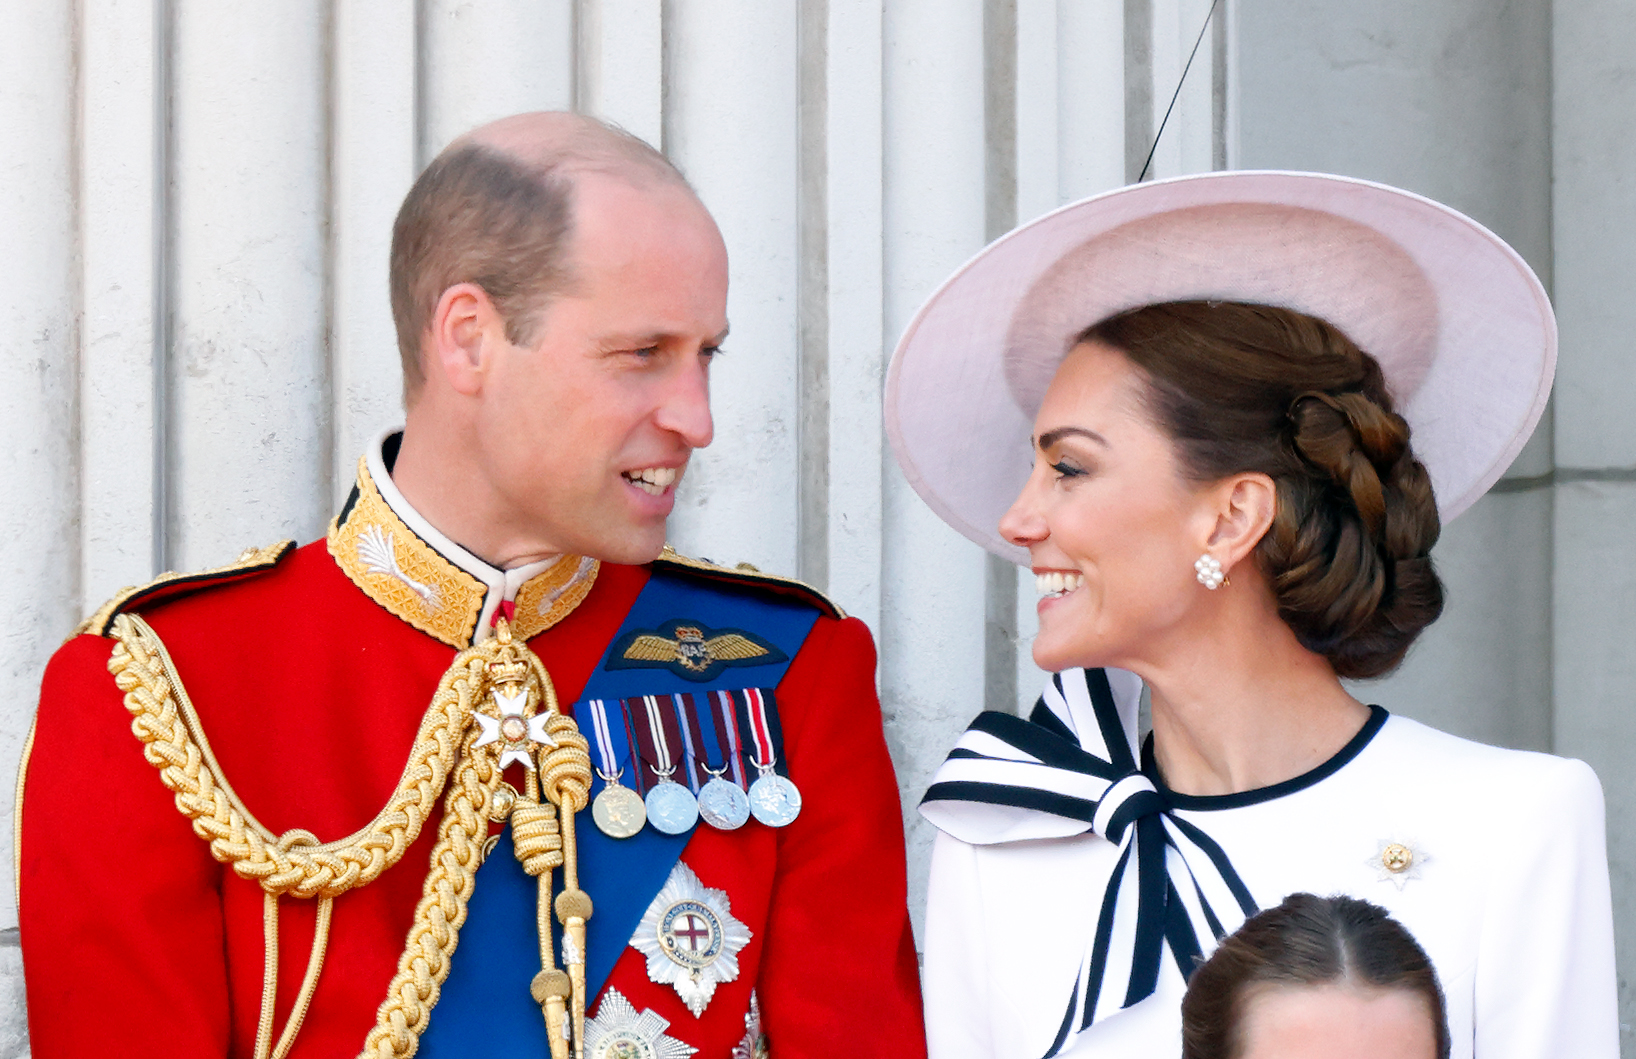 Prince William looks at Princess Catherine as they observe the Royal Air Force flypast from the balcony of Buckingham Palace in London on June 15, 2024. | Source: Getty Images